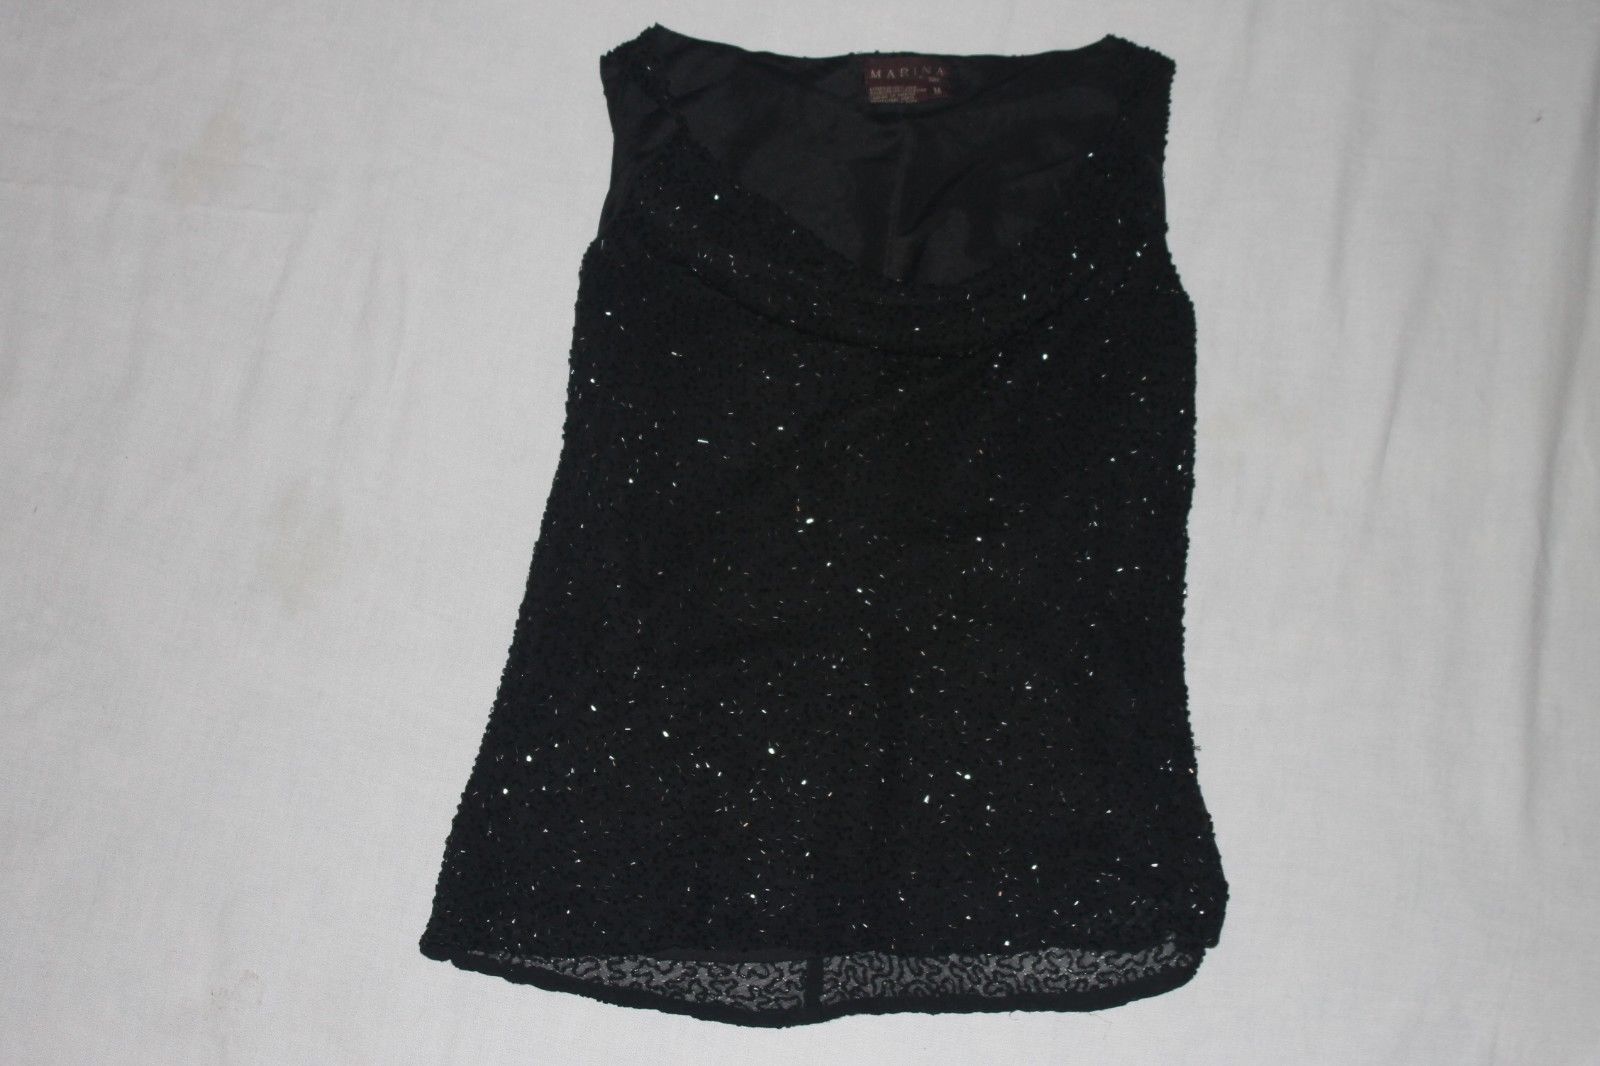 Primary image for Marina by Marina Bresler 100% silk Black sequin lwomans top Size M